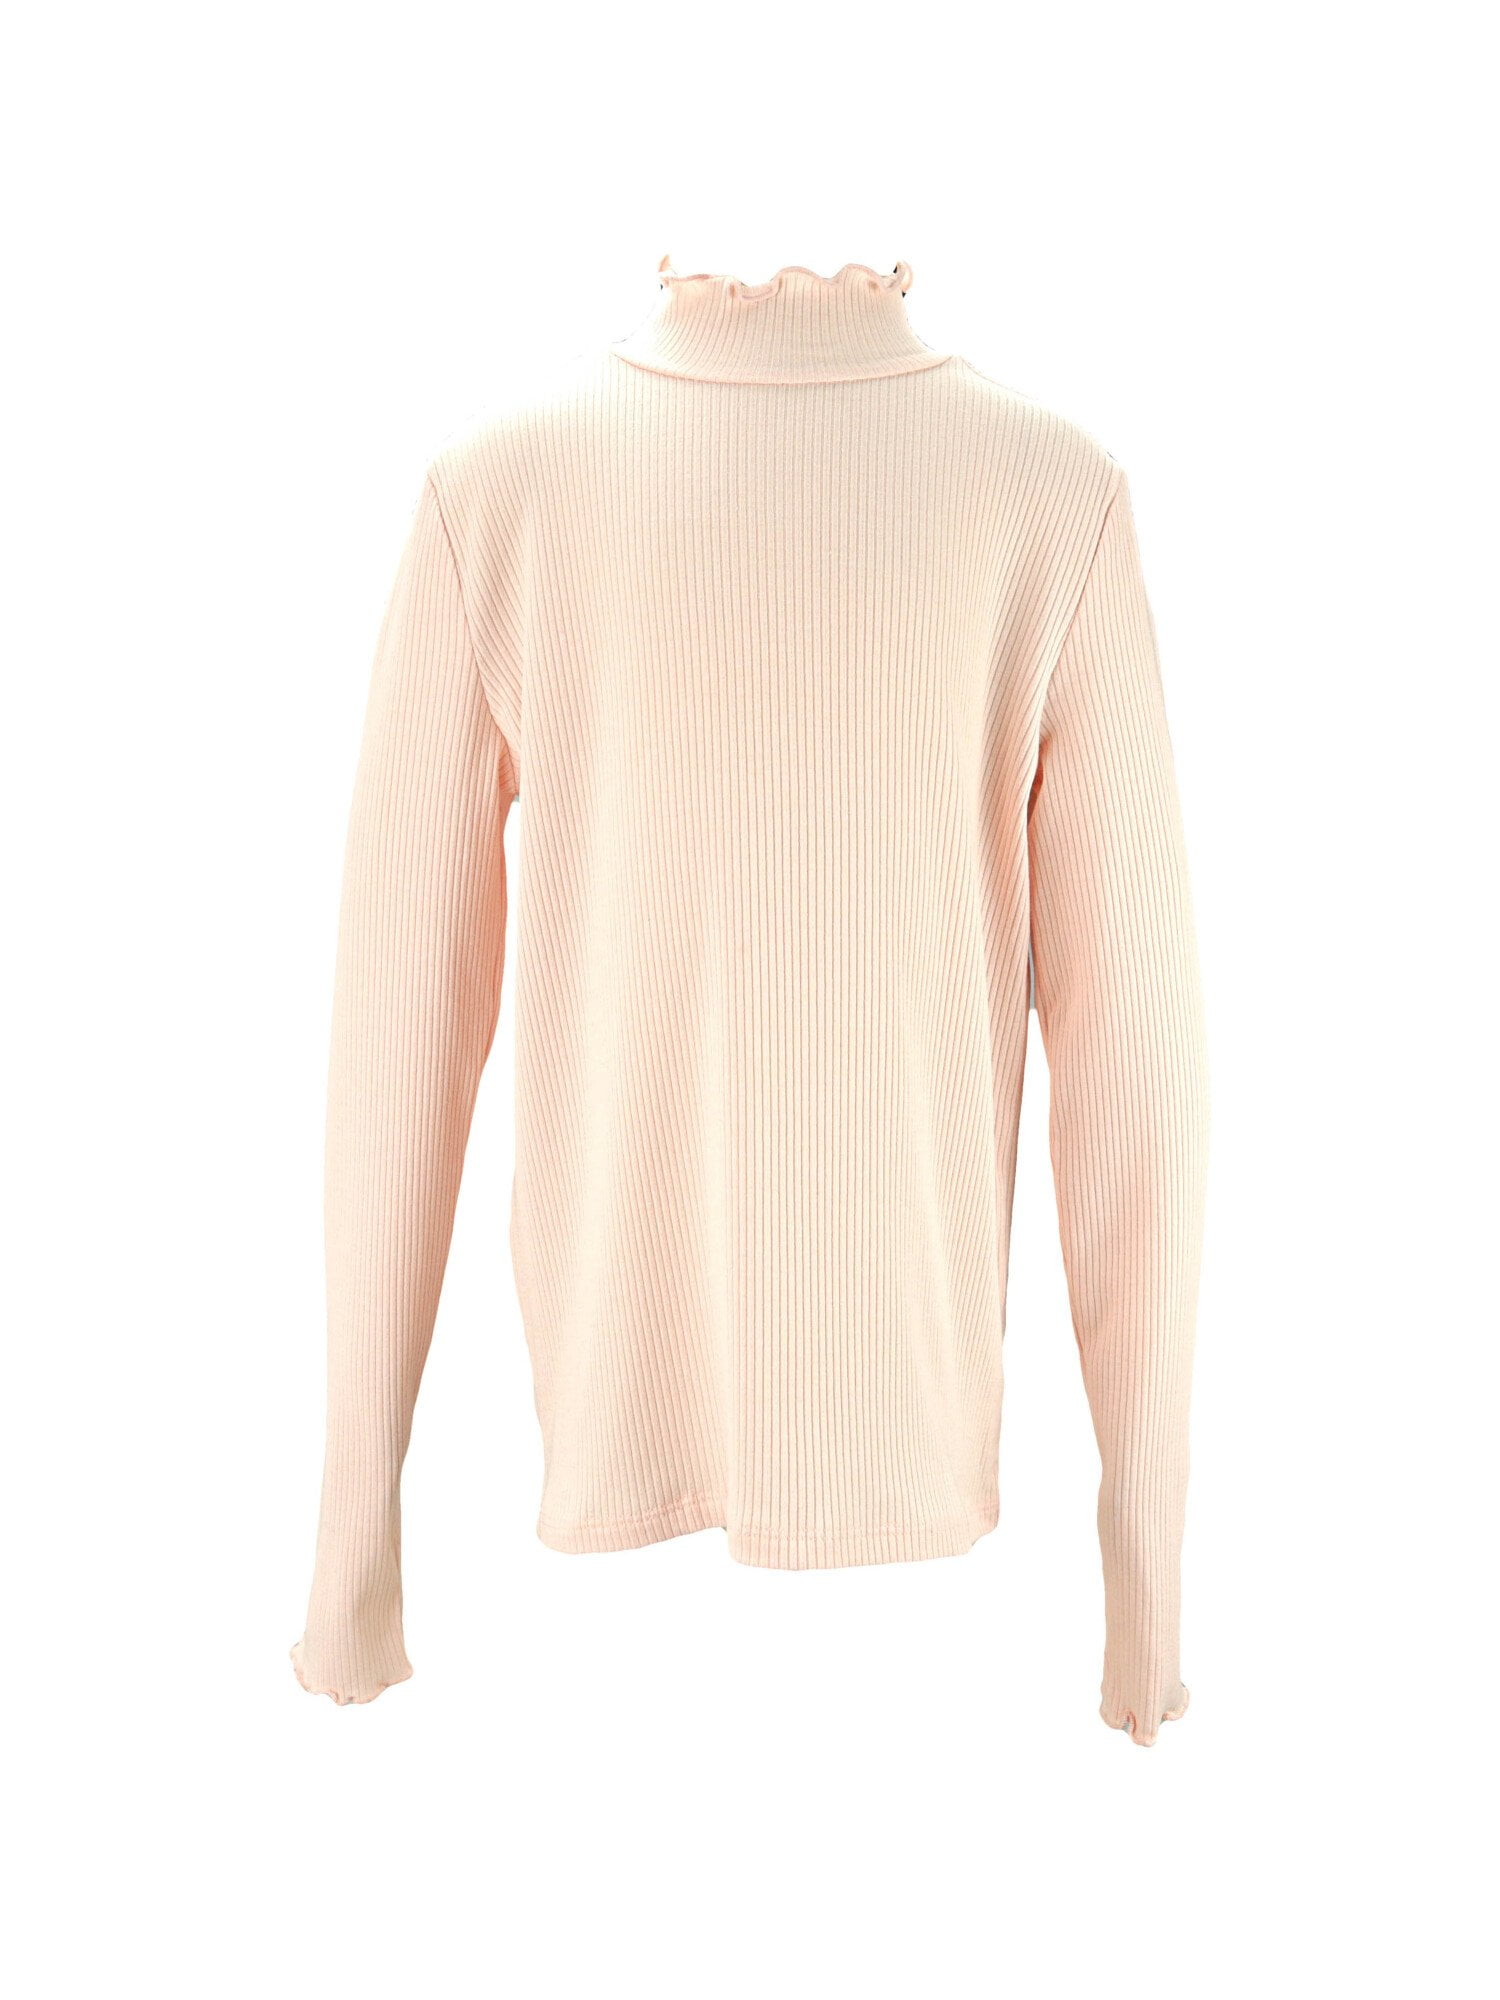 Janie And Jack Girl/'s Ribbed Turtleneck Top Long-sleeve